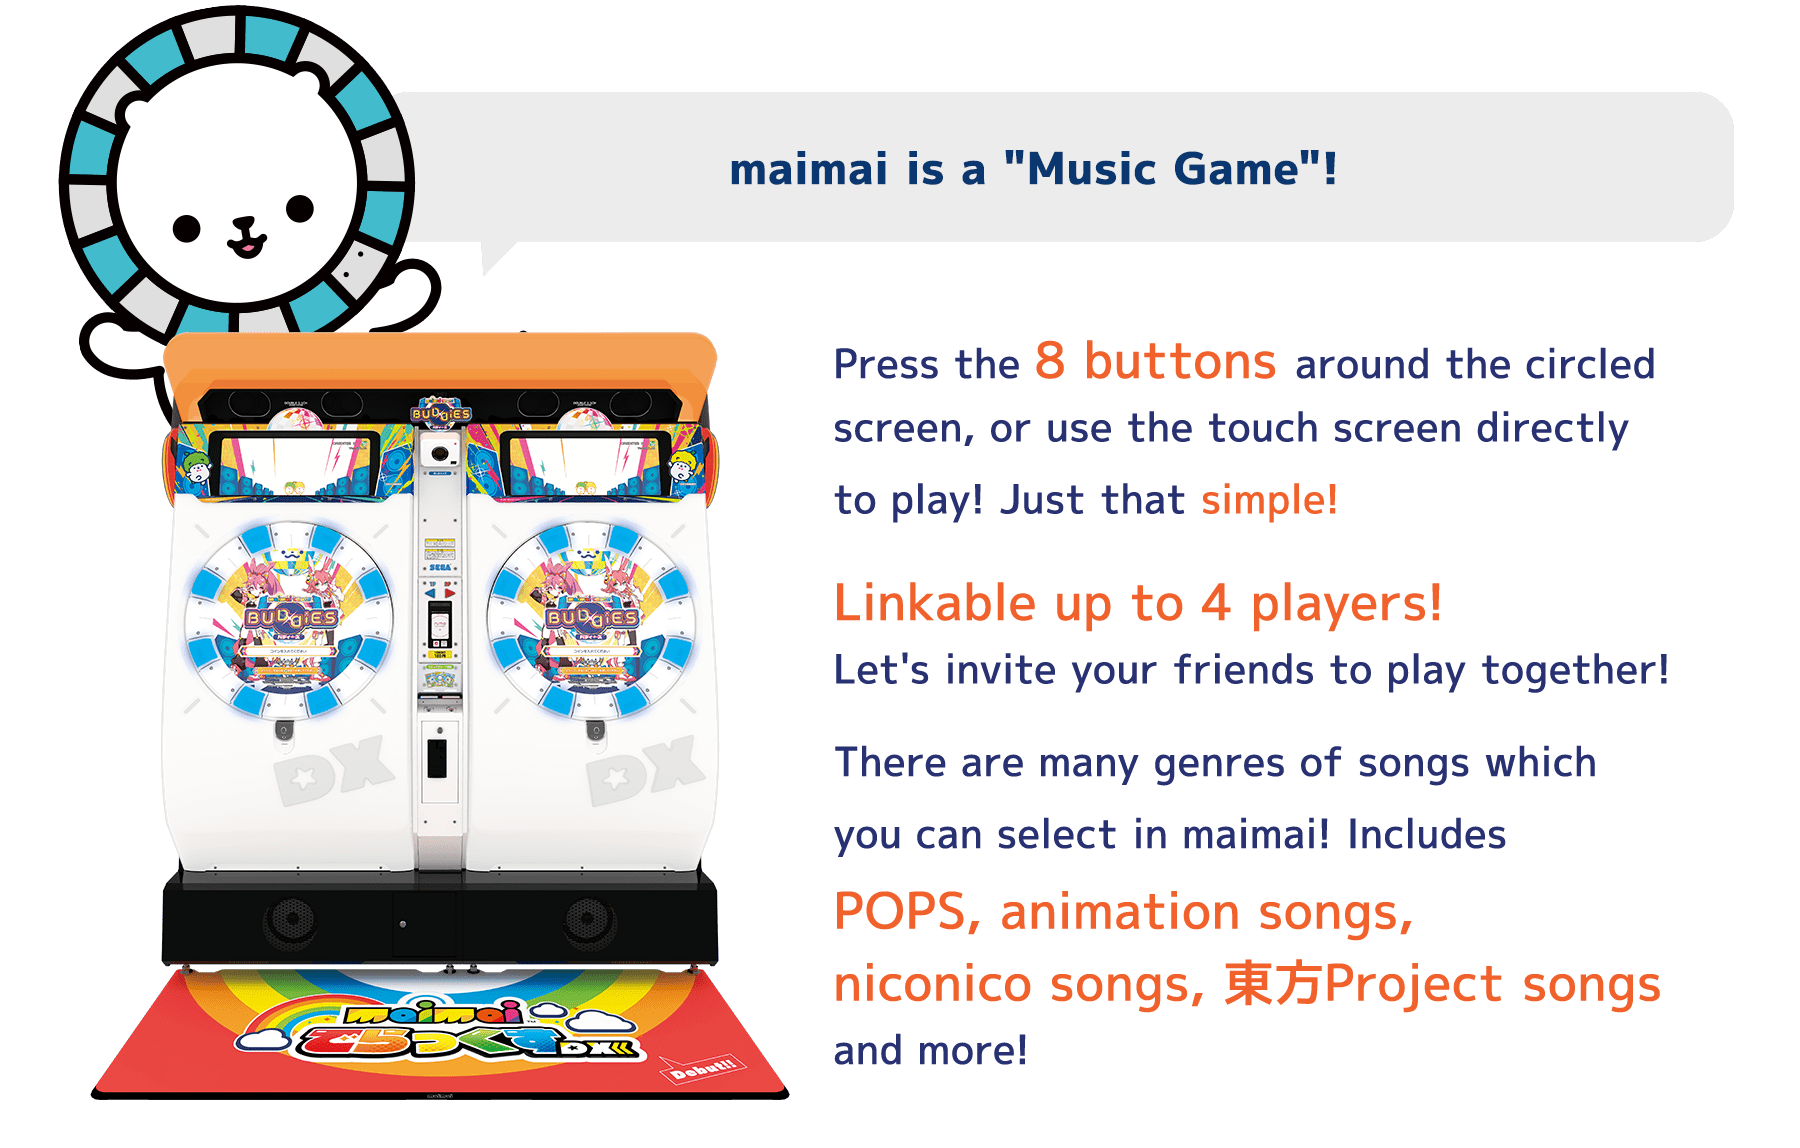 maimai is a "Music Game"!
          Press the 8 buttons around the circled
          screen, or use the touch screen directly
          to play! Just that simple!
          Linkable up to 4 players!
          Let's invite your friends to play together!
          There are many genres of songs which
          you can select in maimai! Includes
          POPS, animation songs,
          niconico songs, 東方Project songs
          and more!